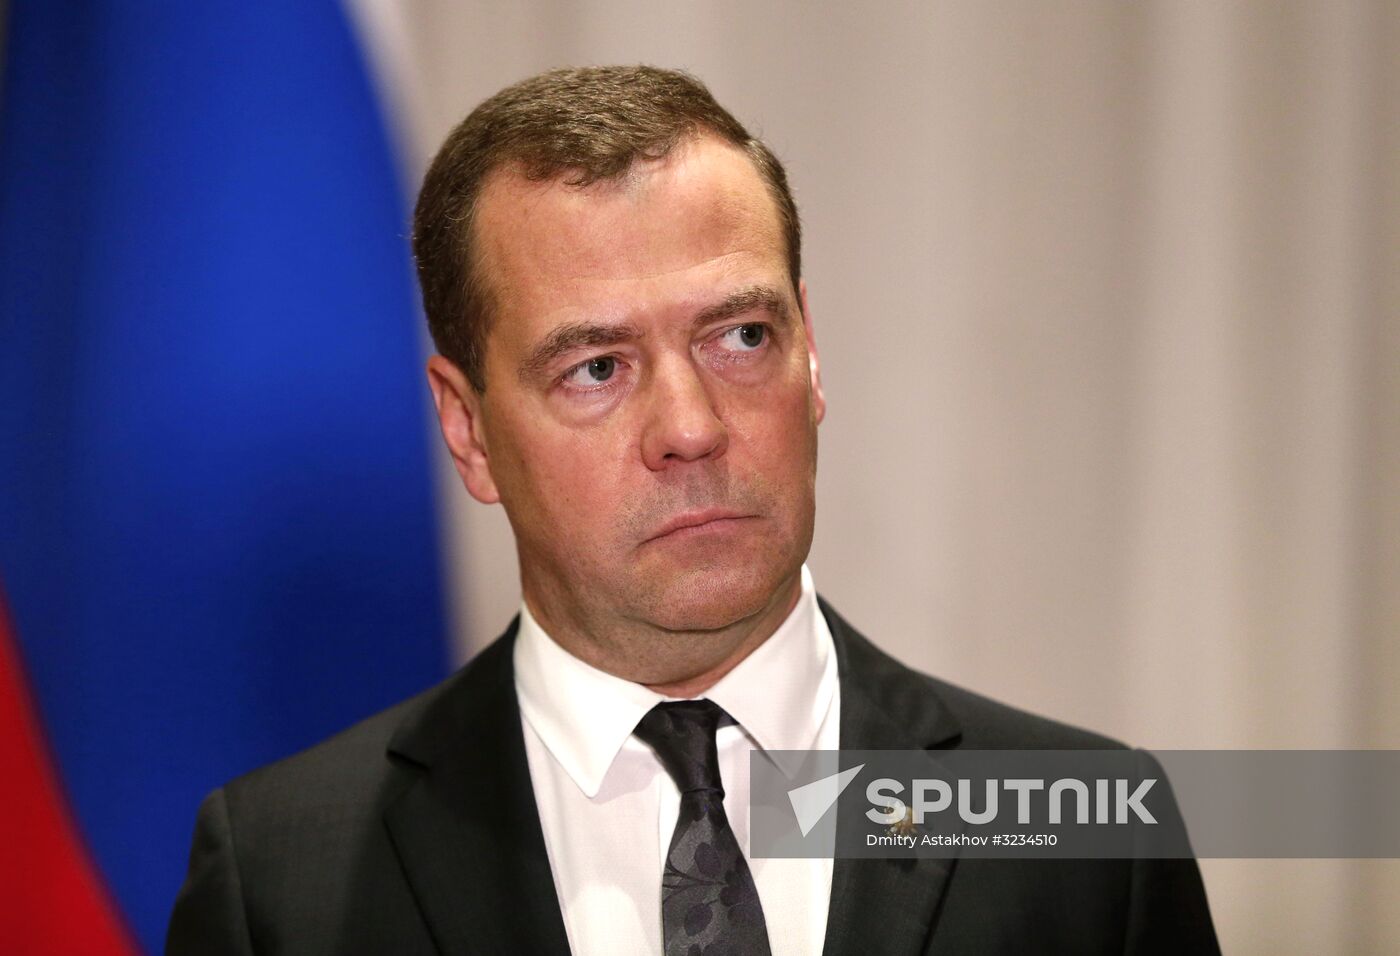 Russian PM Dmitry Medvedev attends East Asia Summit